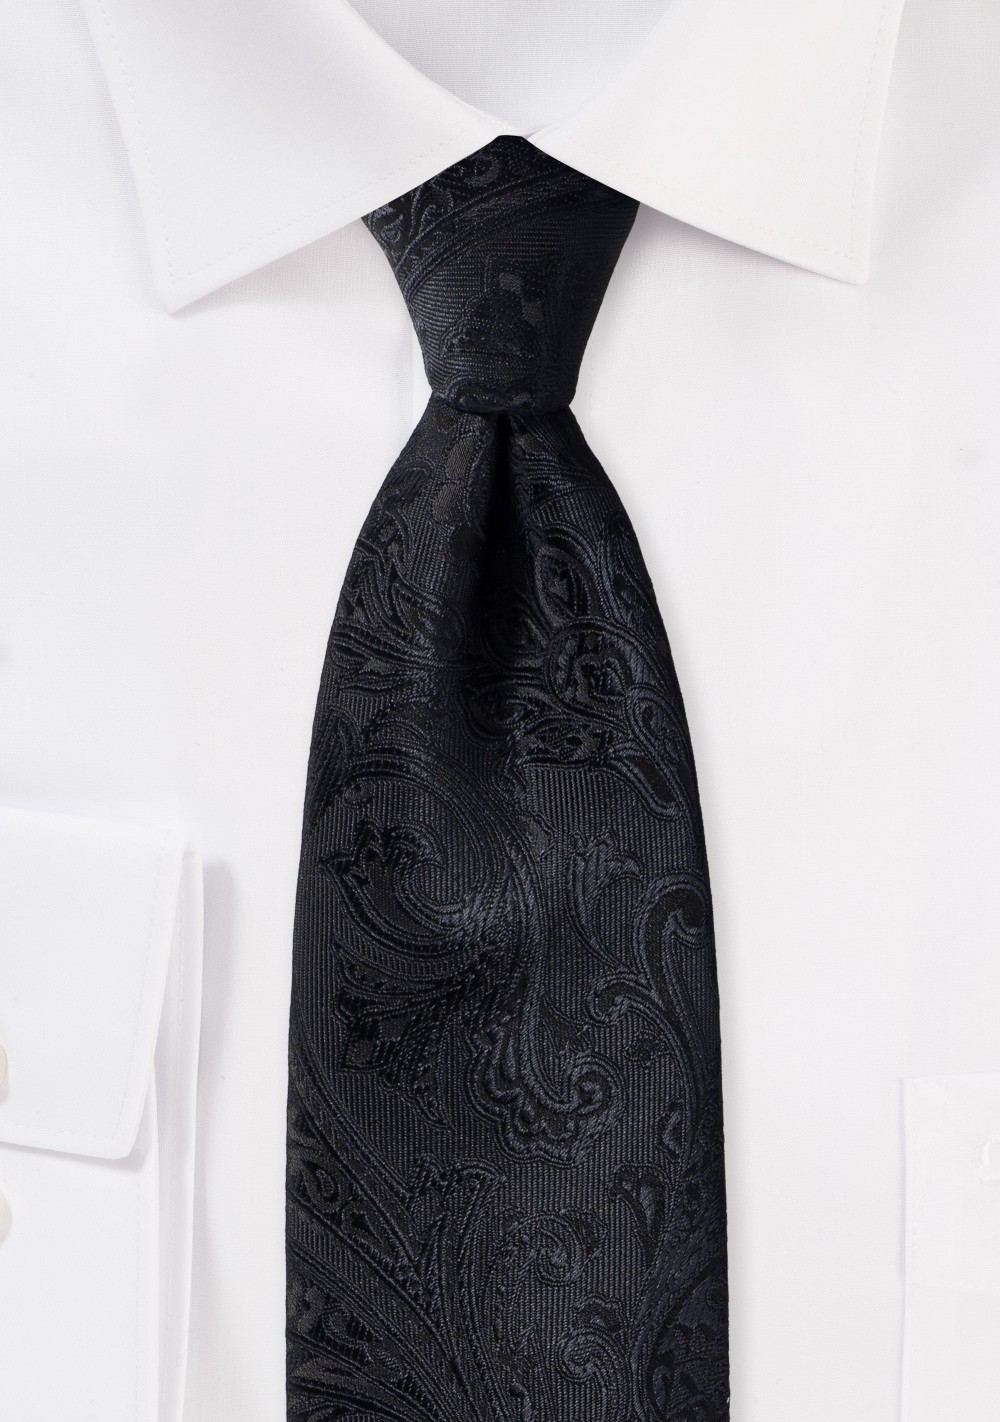 Woven Paisley Tie in Solid Black